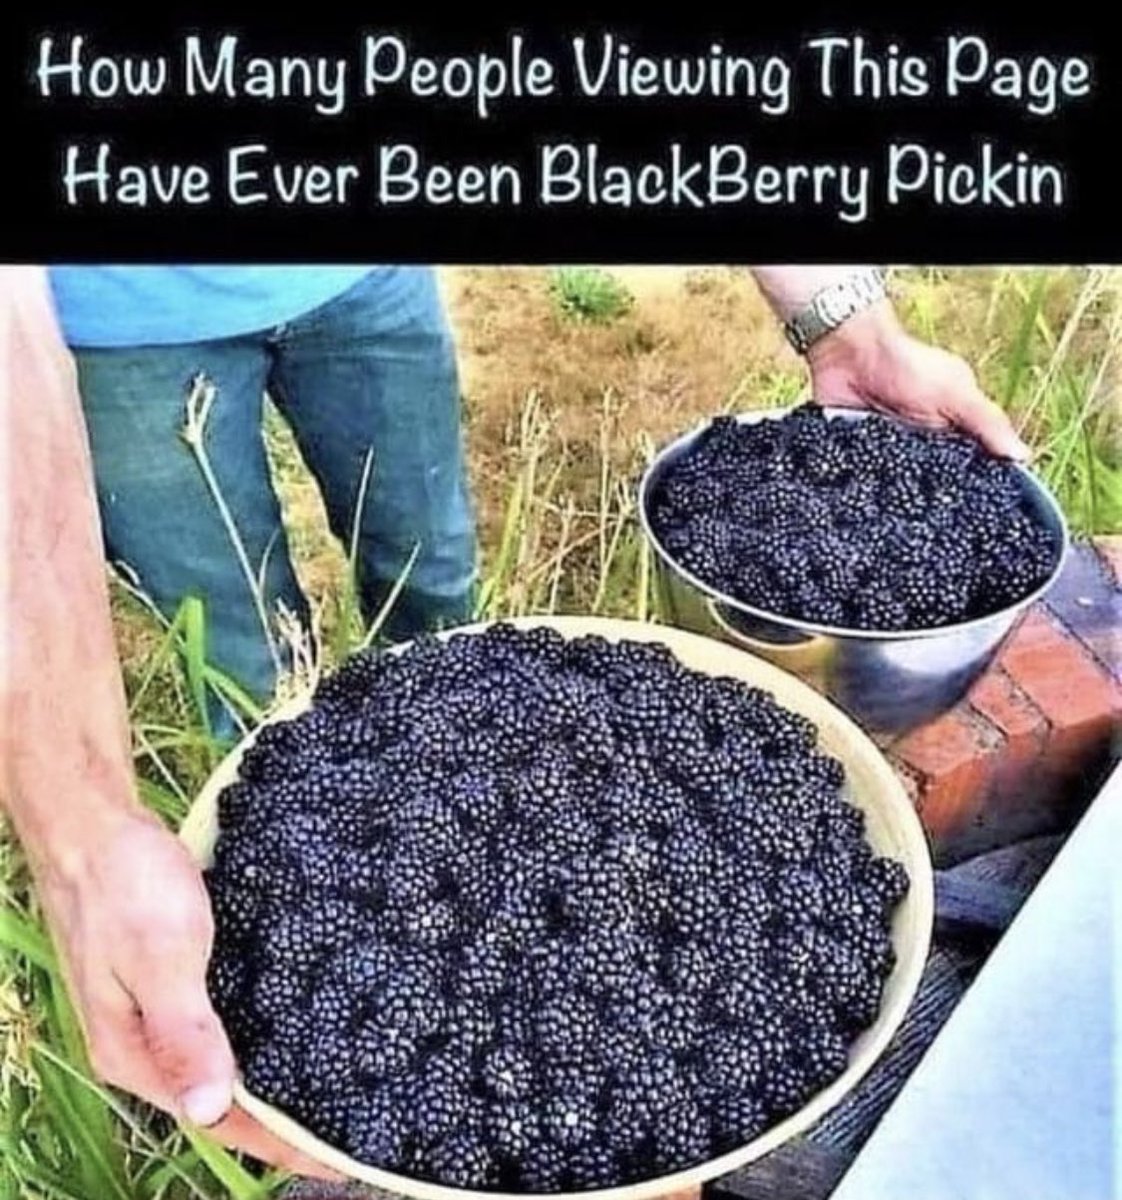 this is important data rt if you've been blackberry pickin